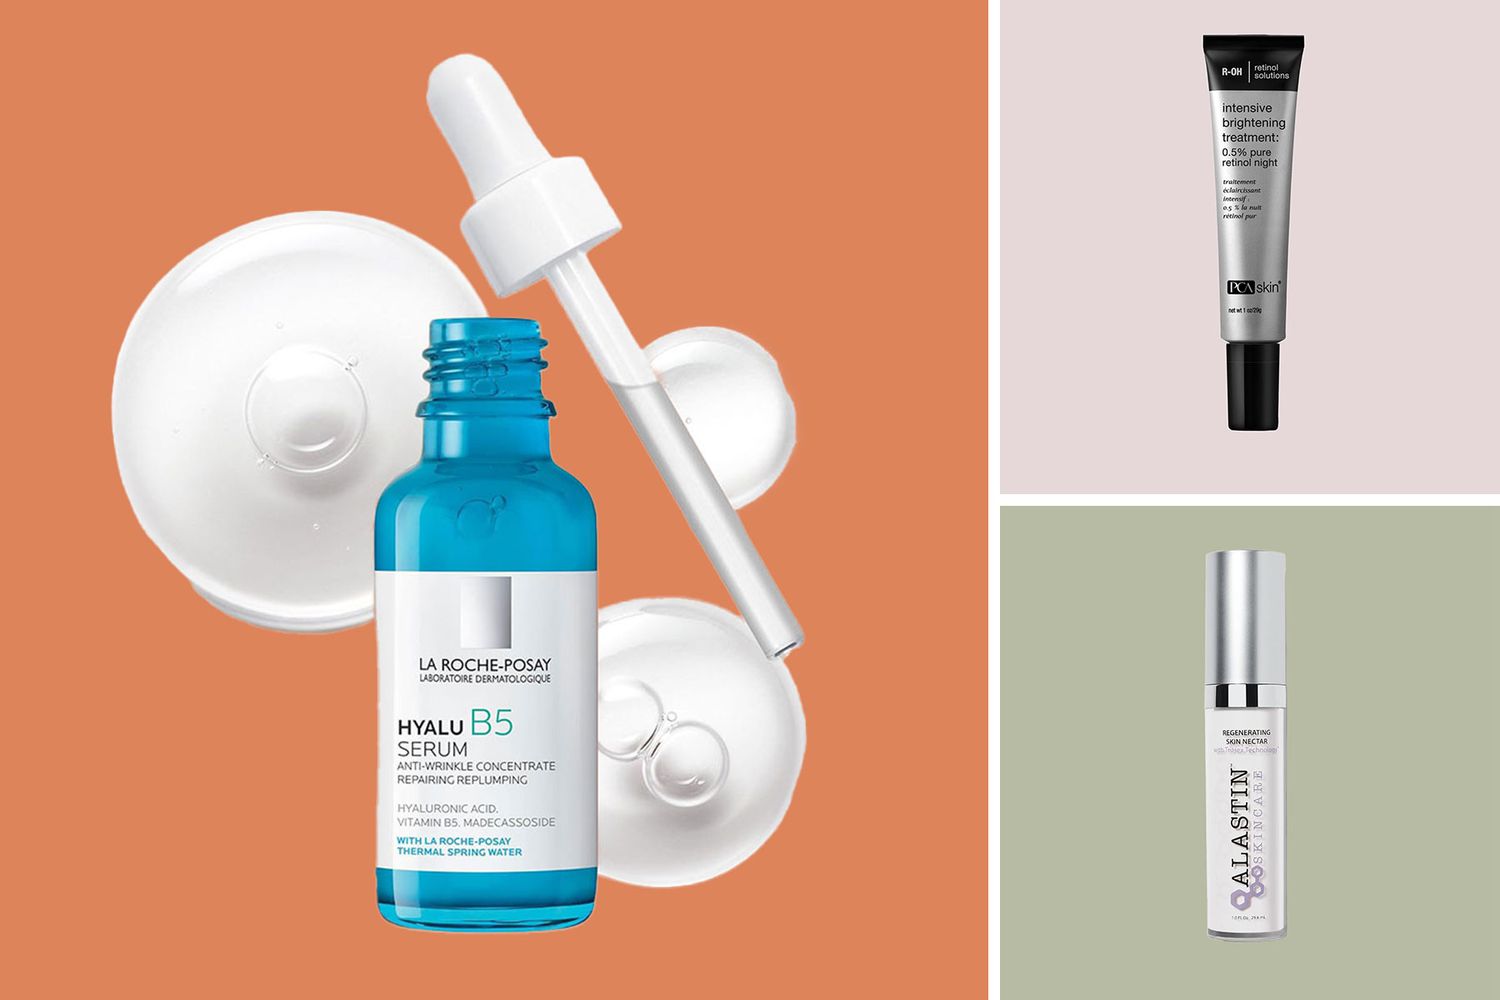 10 Dermatologist-Approved Anti-Aging Creams and Serums to Shop [Video]